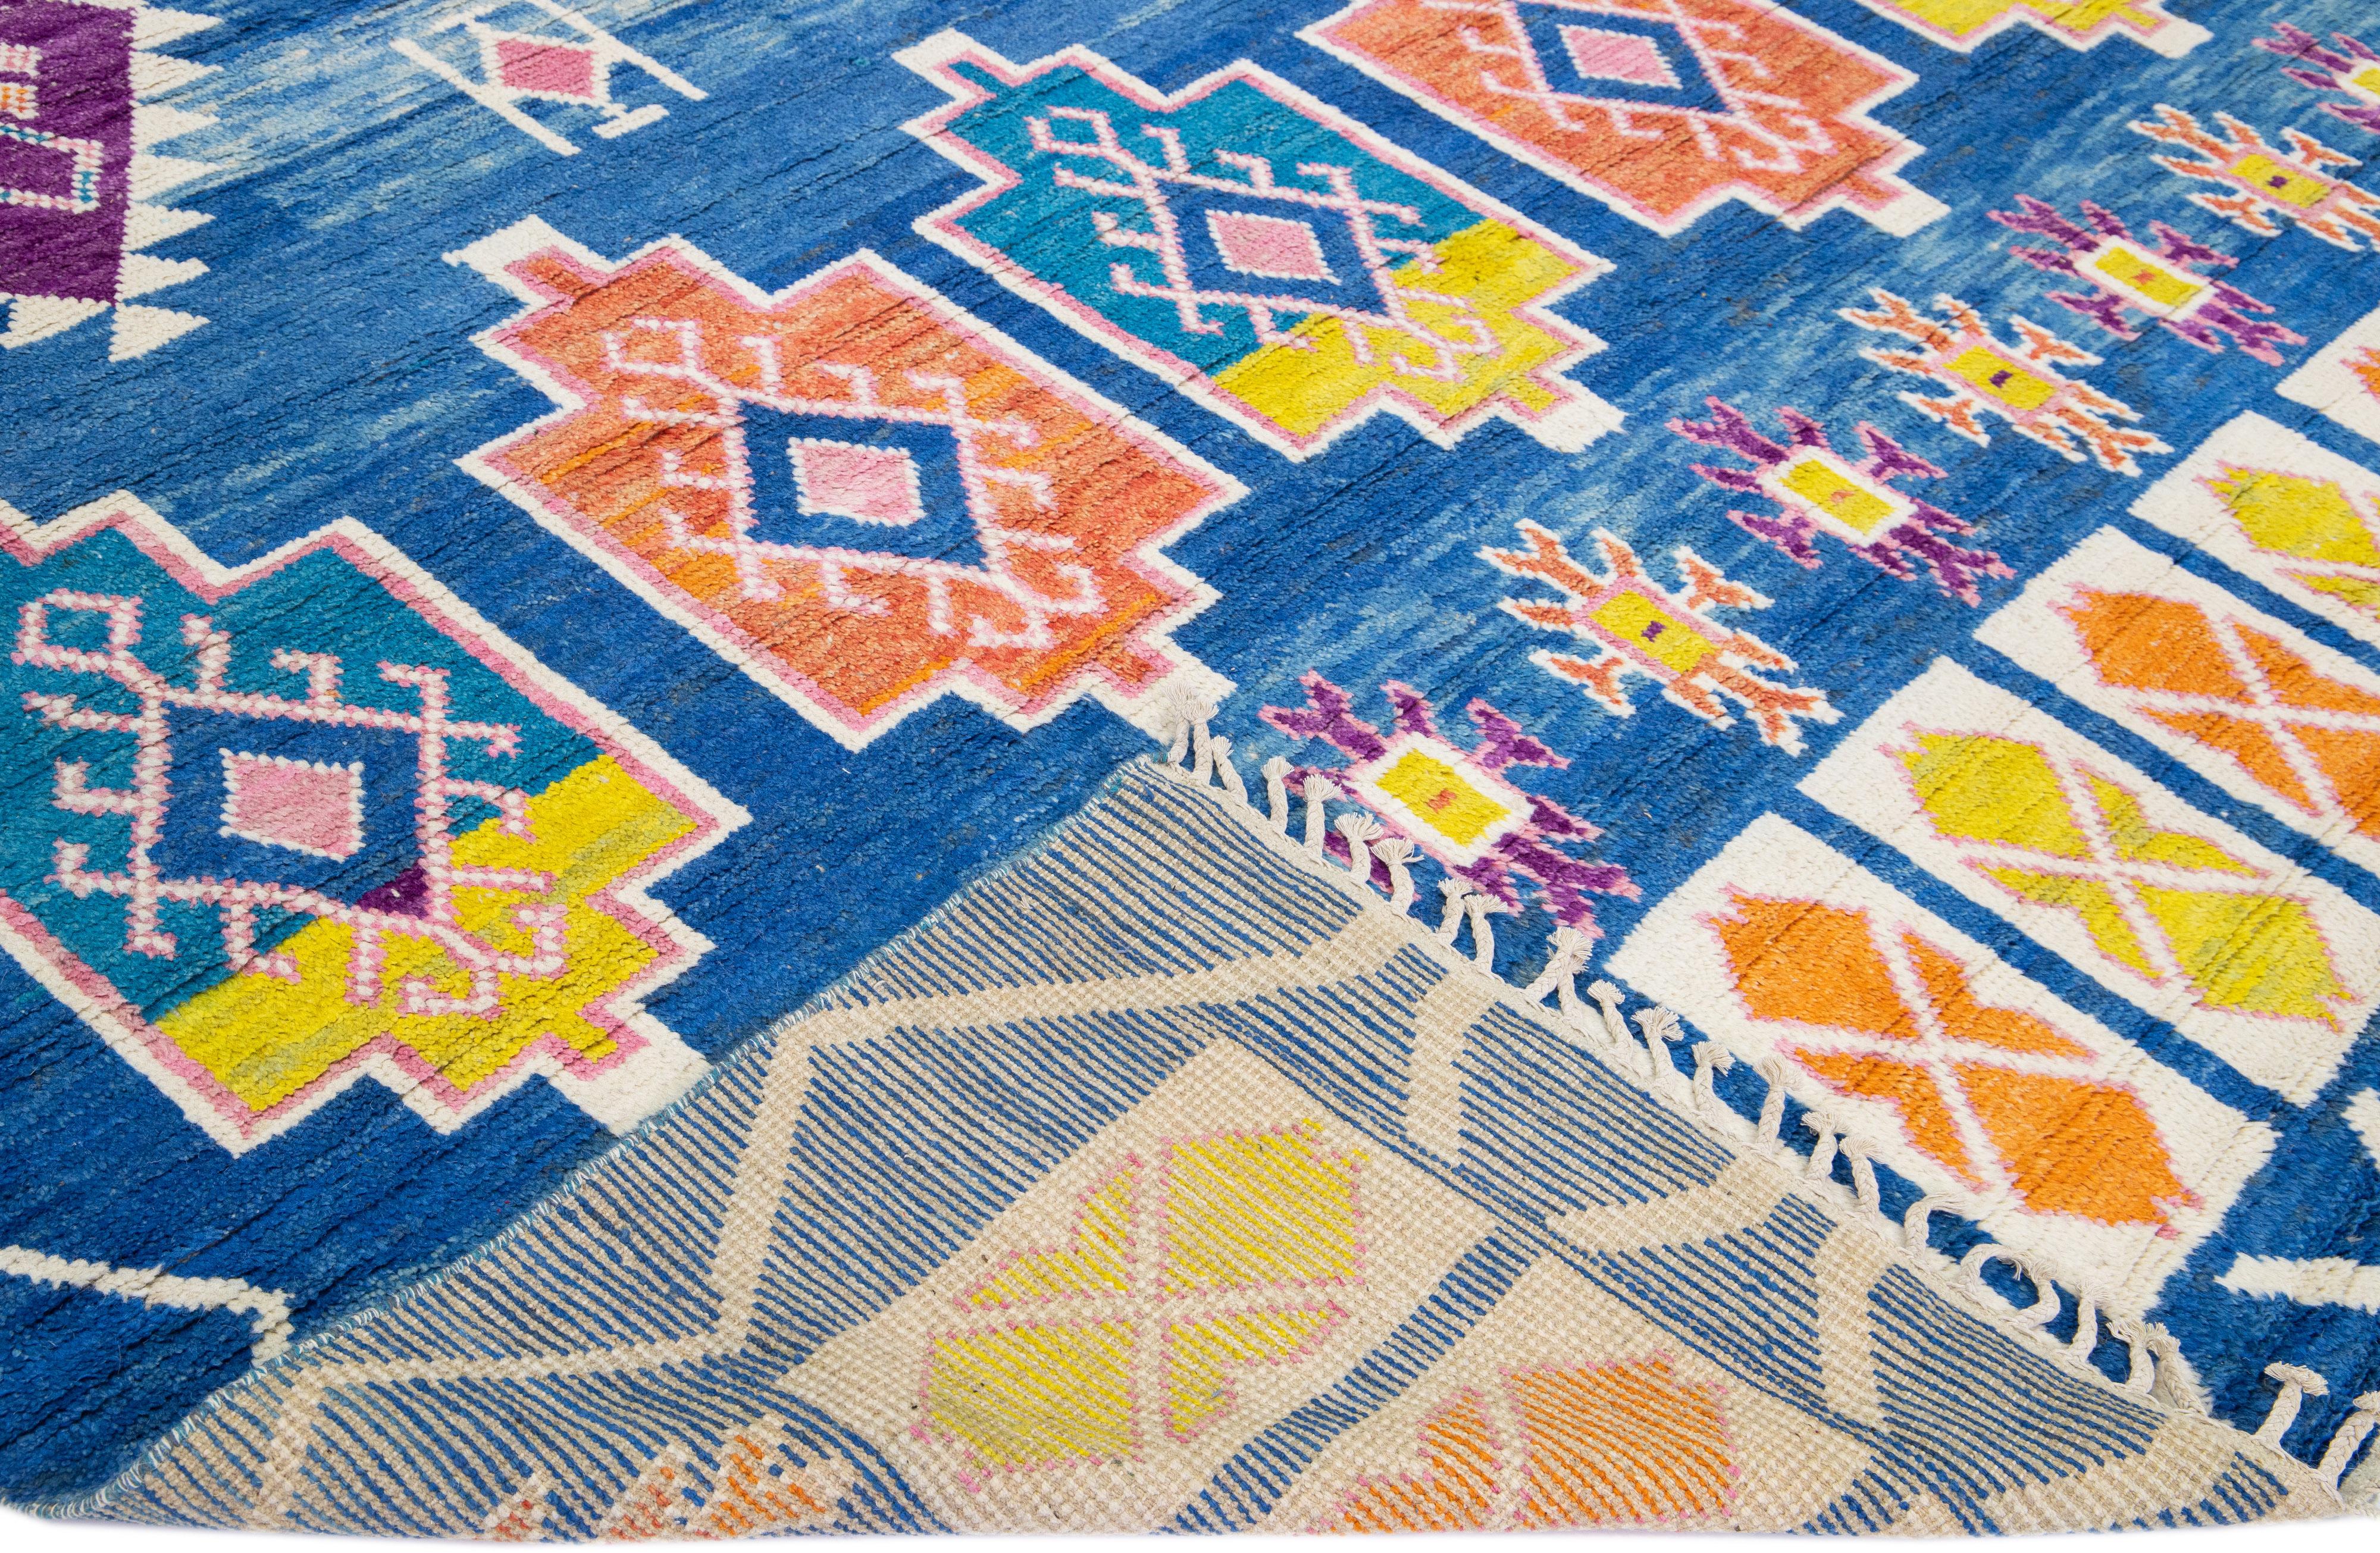 Beautiful modern Moroccan style hand-knotted wool rug with a blue field. This piece has multicolor accent colors in a geometric tribal pattern design with beige fringes on the top and bottom end.

This rug measures: 10' x 14'5